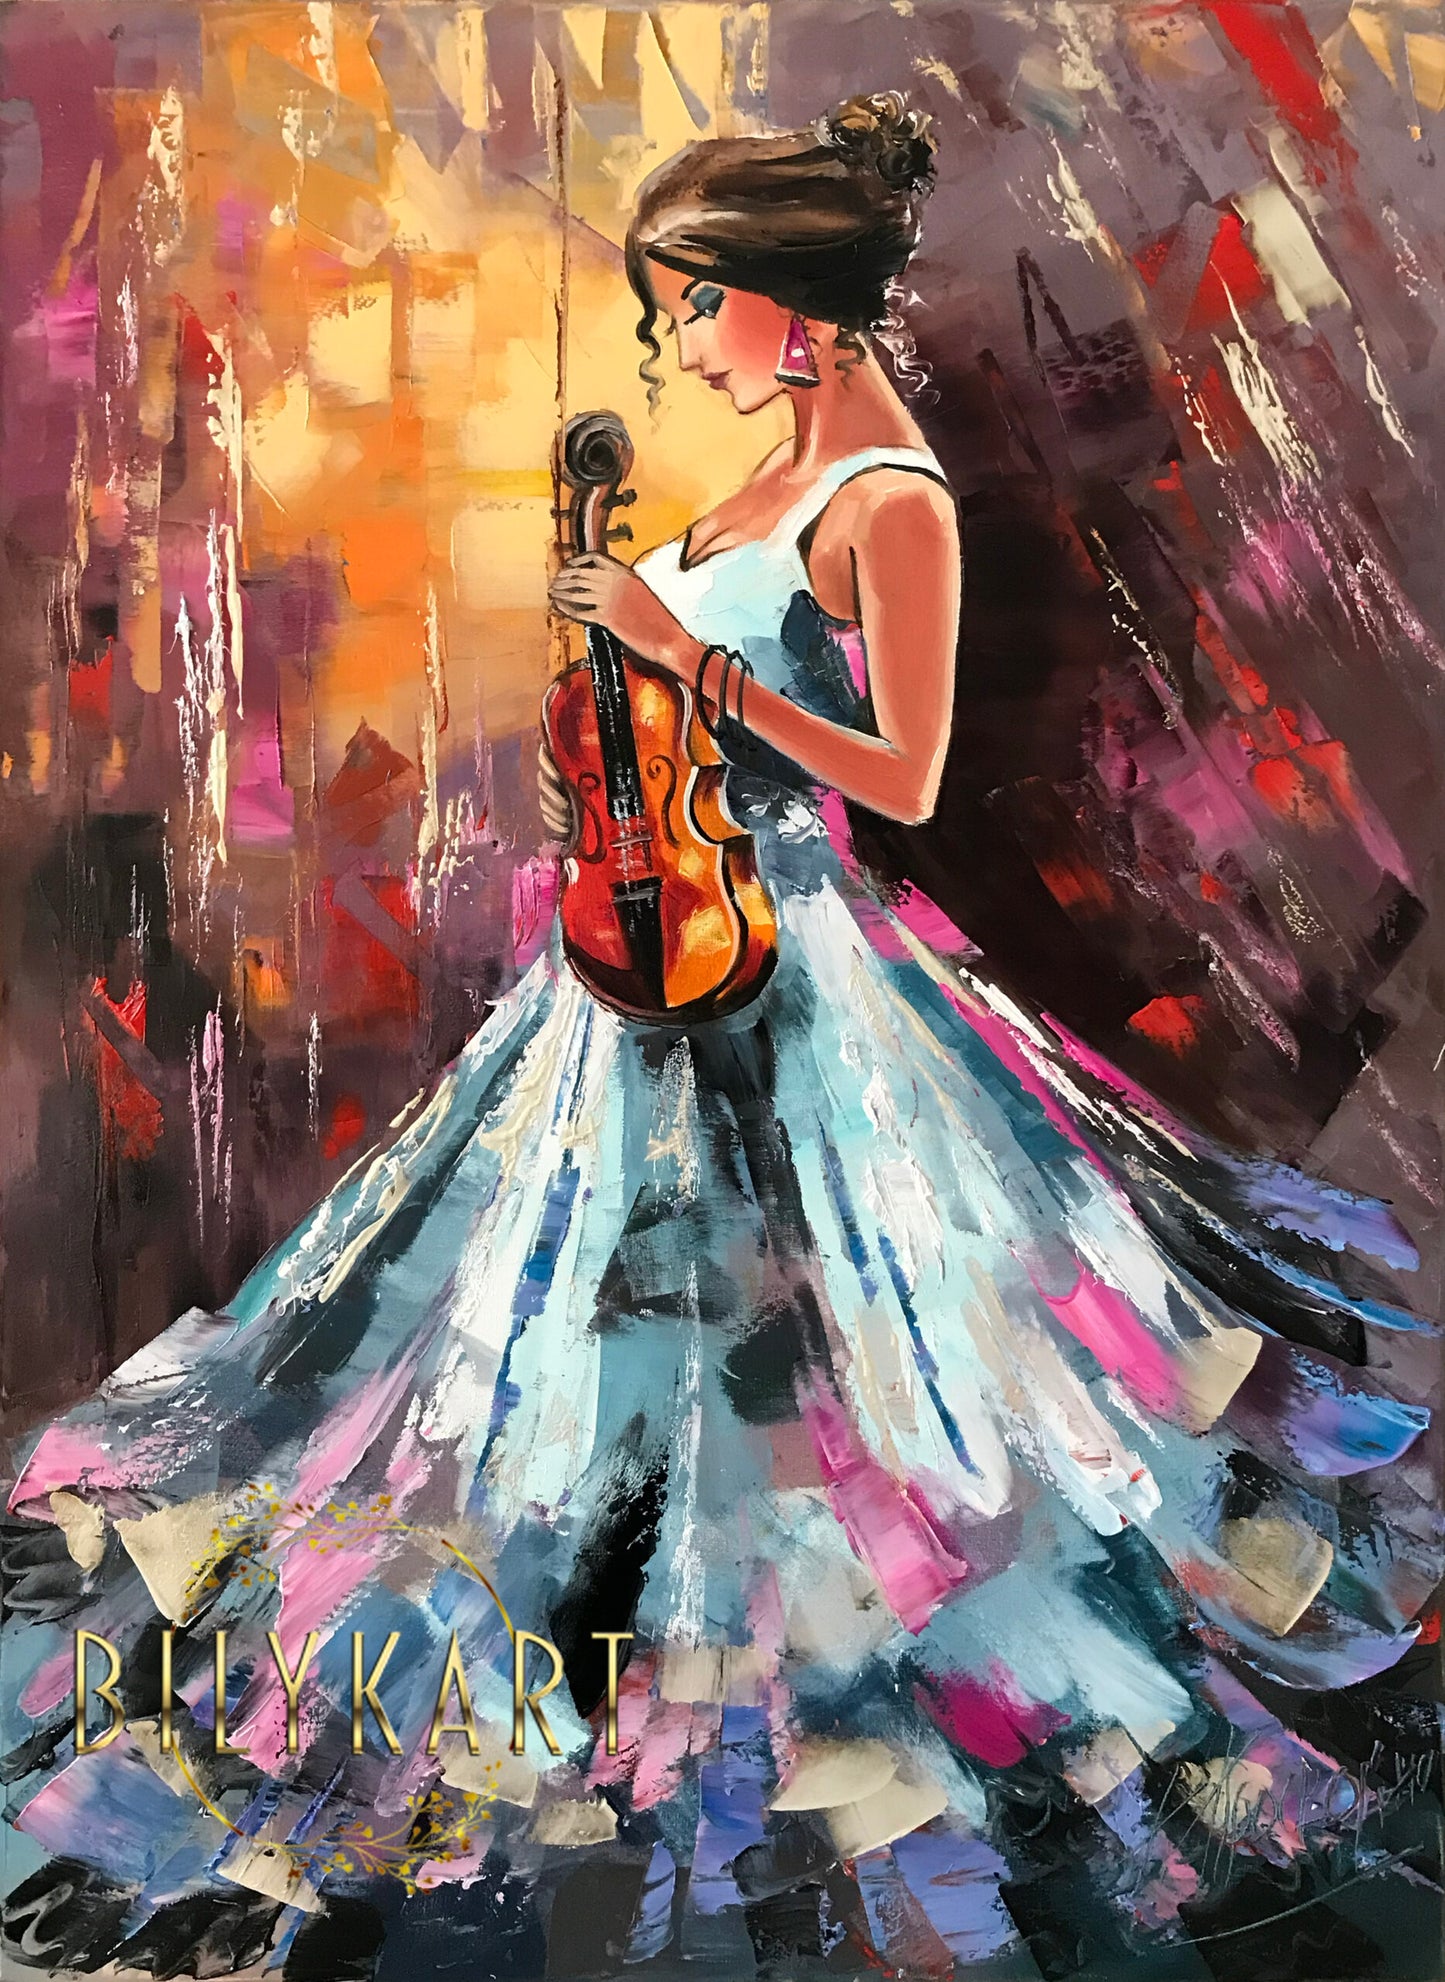 Elegant Lady with Violin Oil Painting Abstract Woman Wall Art Music Art Gift for Her Woman in Blue Dress Painting Oversized Modern Wall Decor Music Art